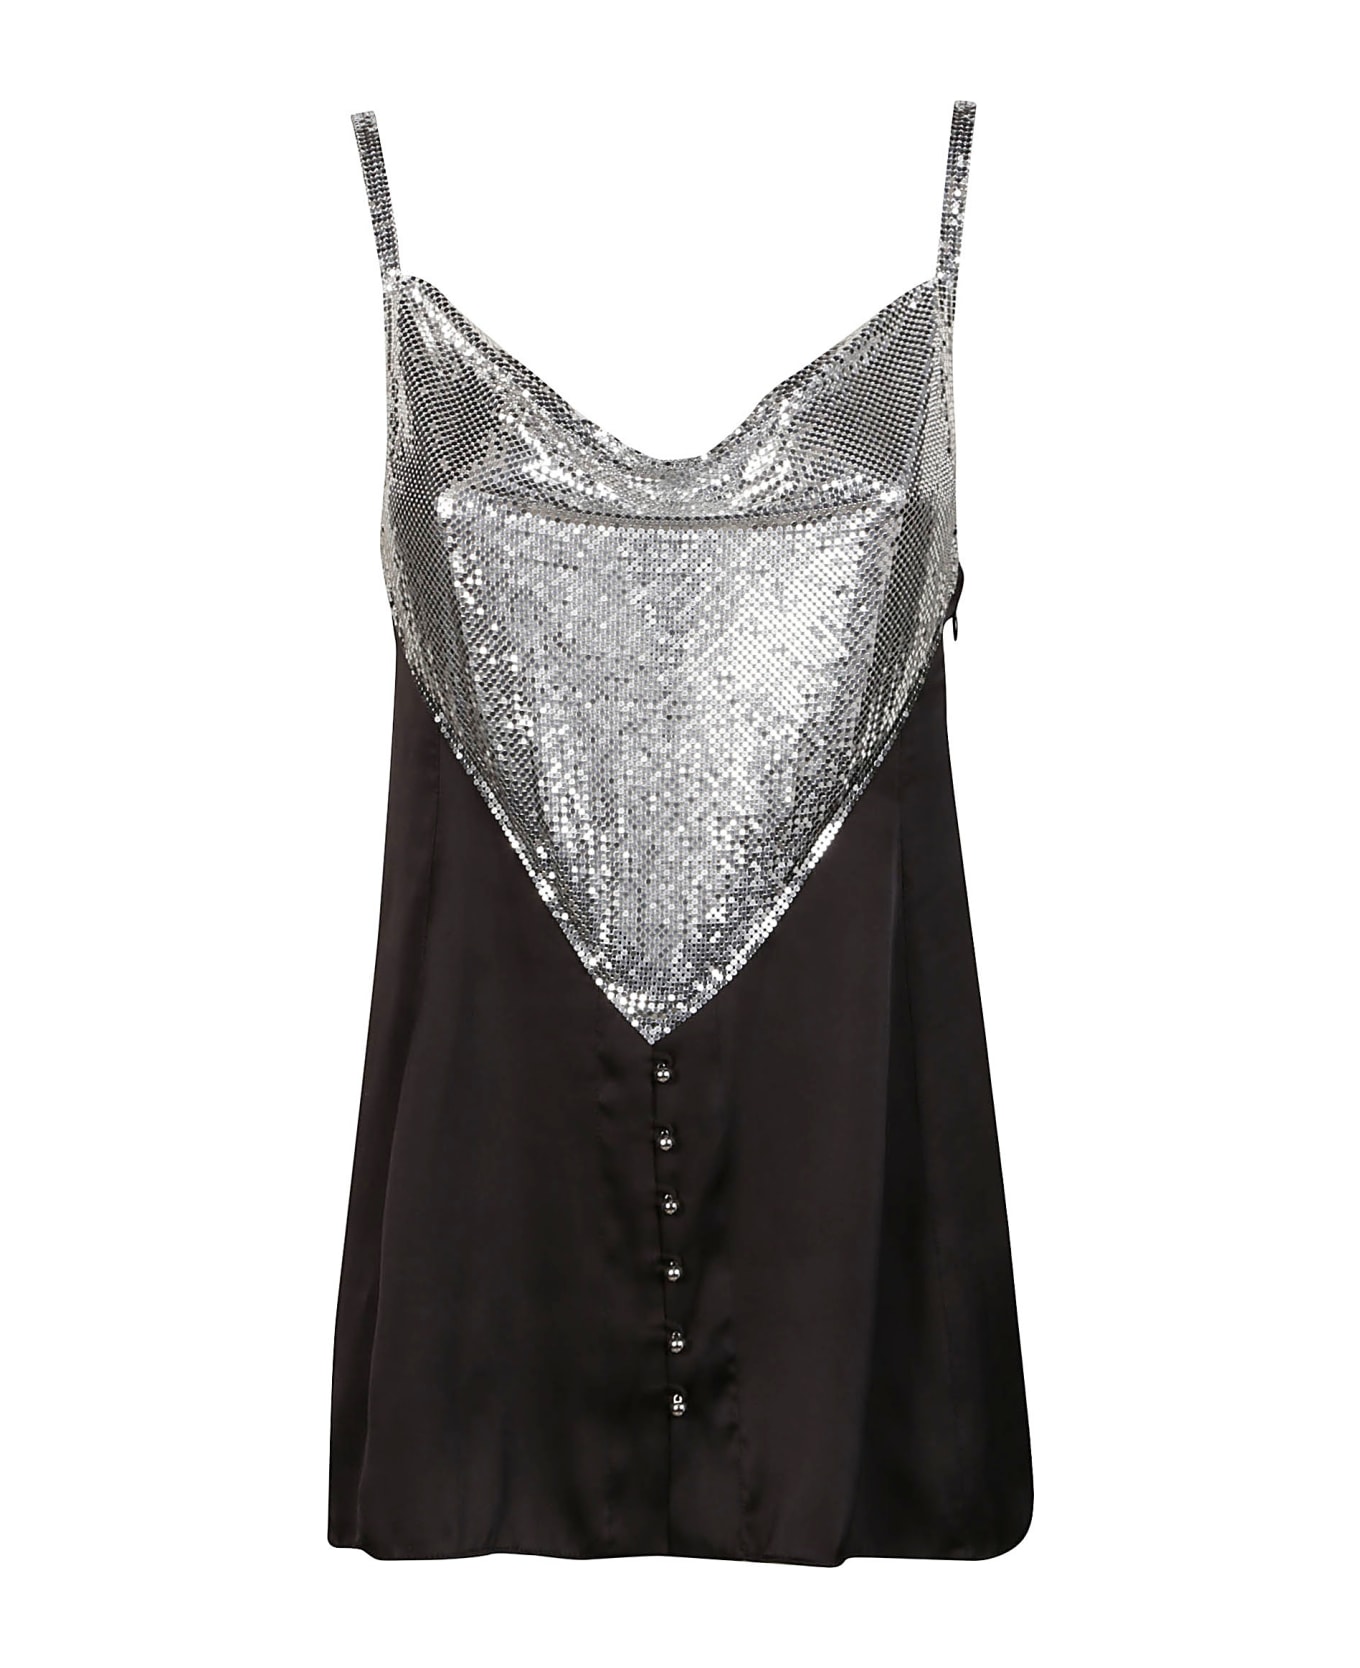 Paco Rabanne Tank Top - Black/silver トップス